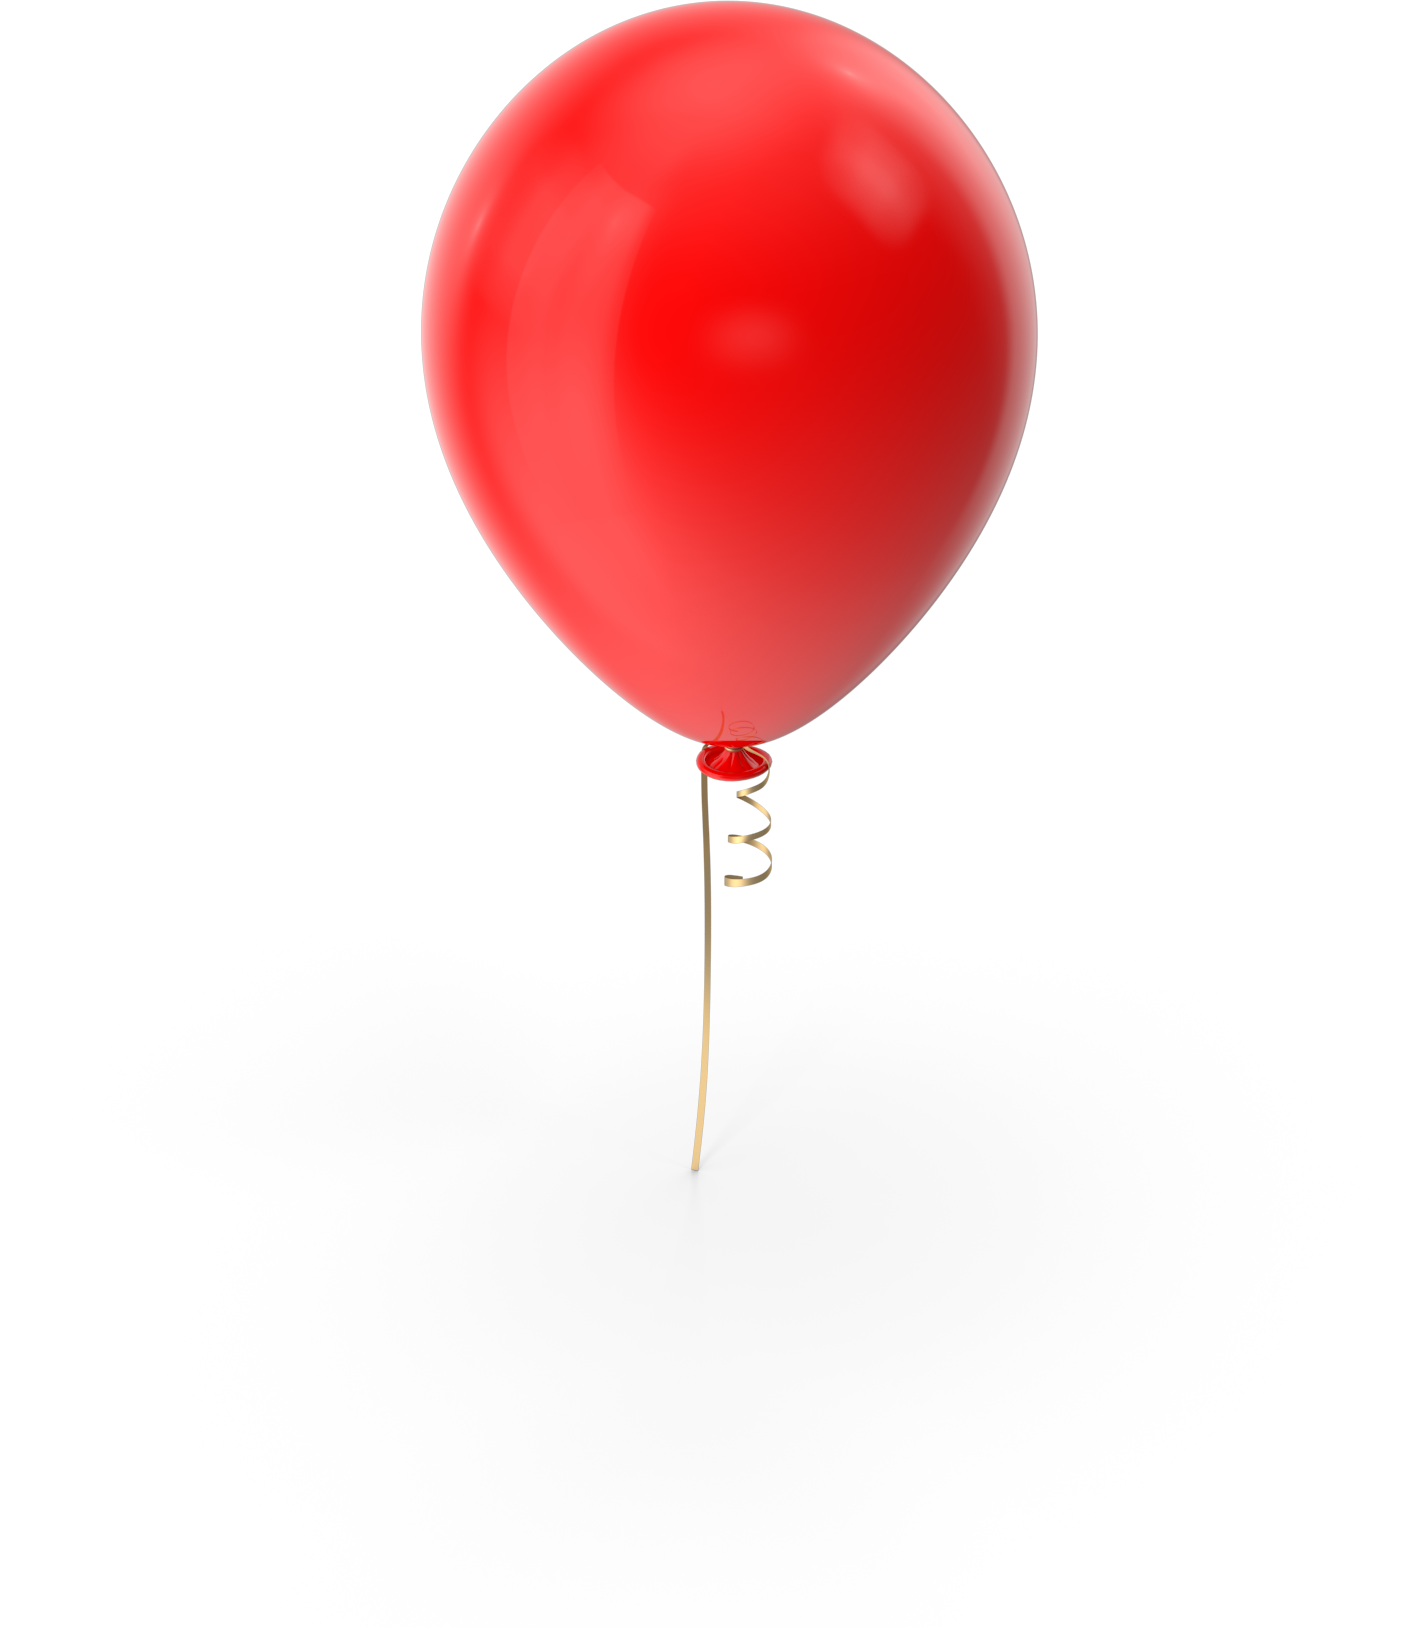 Red Redballoon Balloon Party Sticker By Adlersoreson 